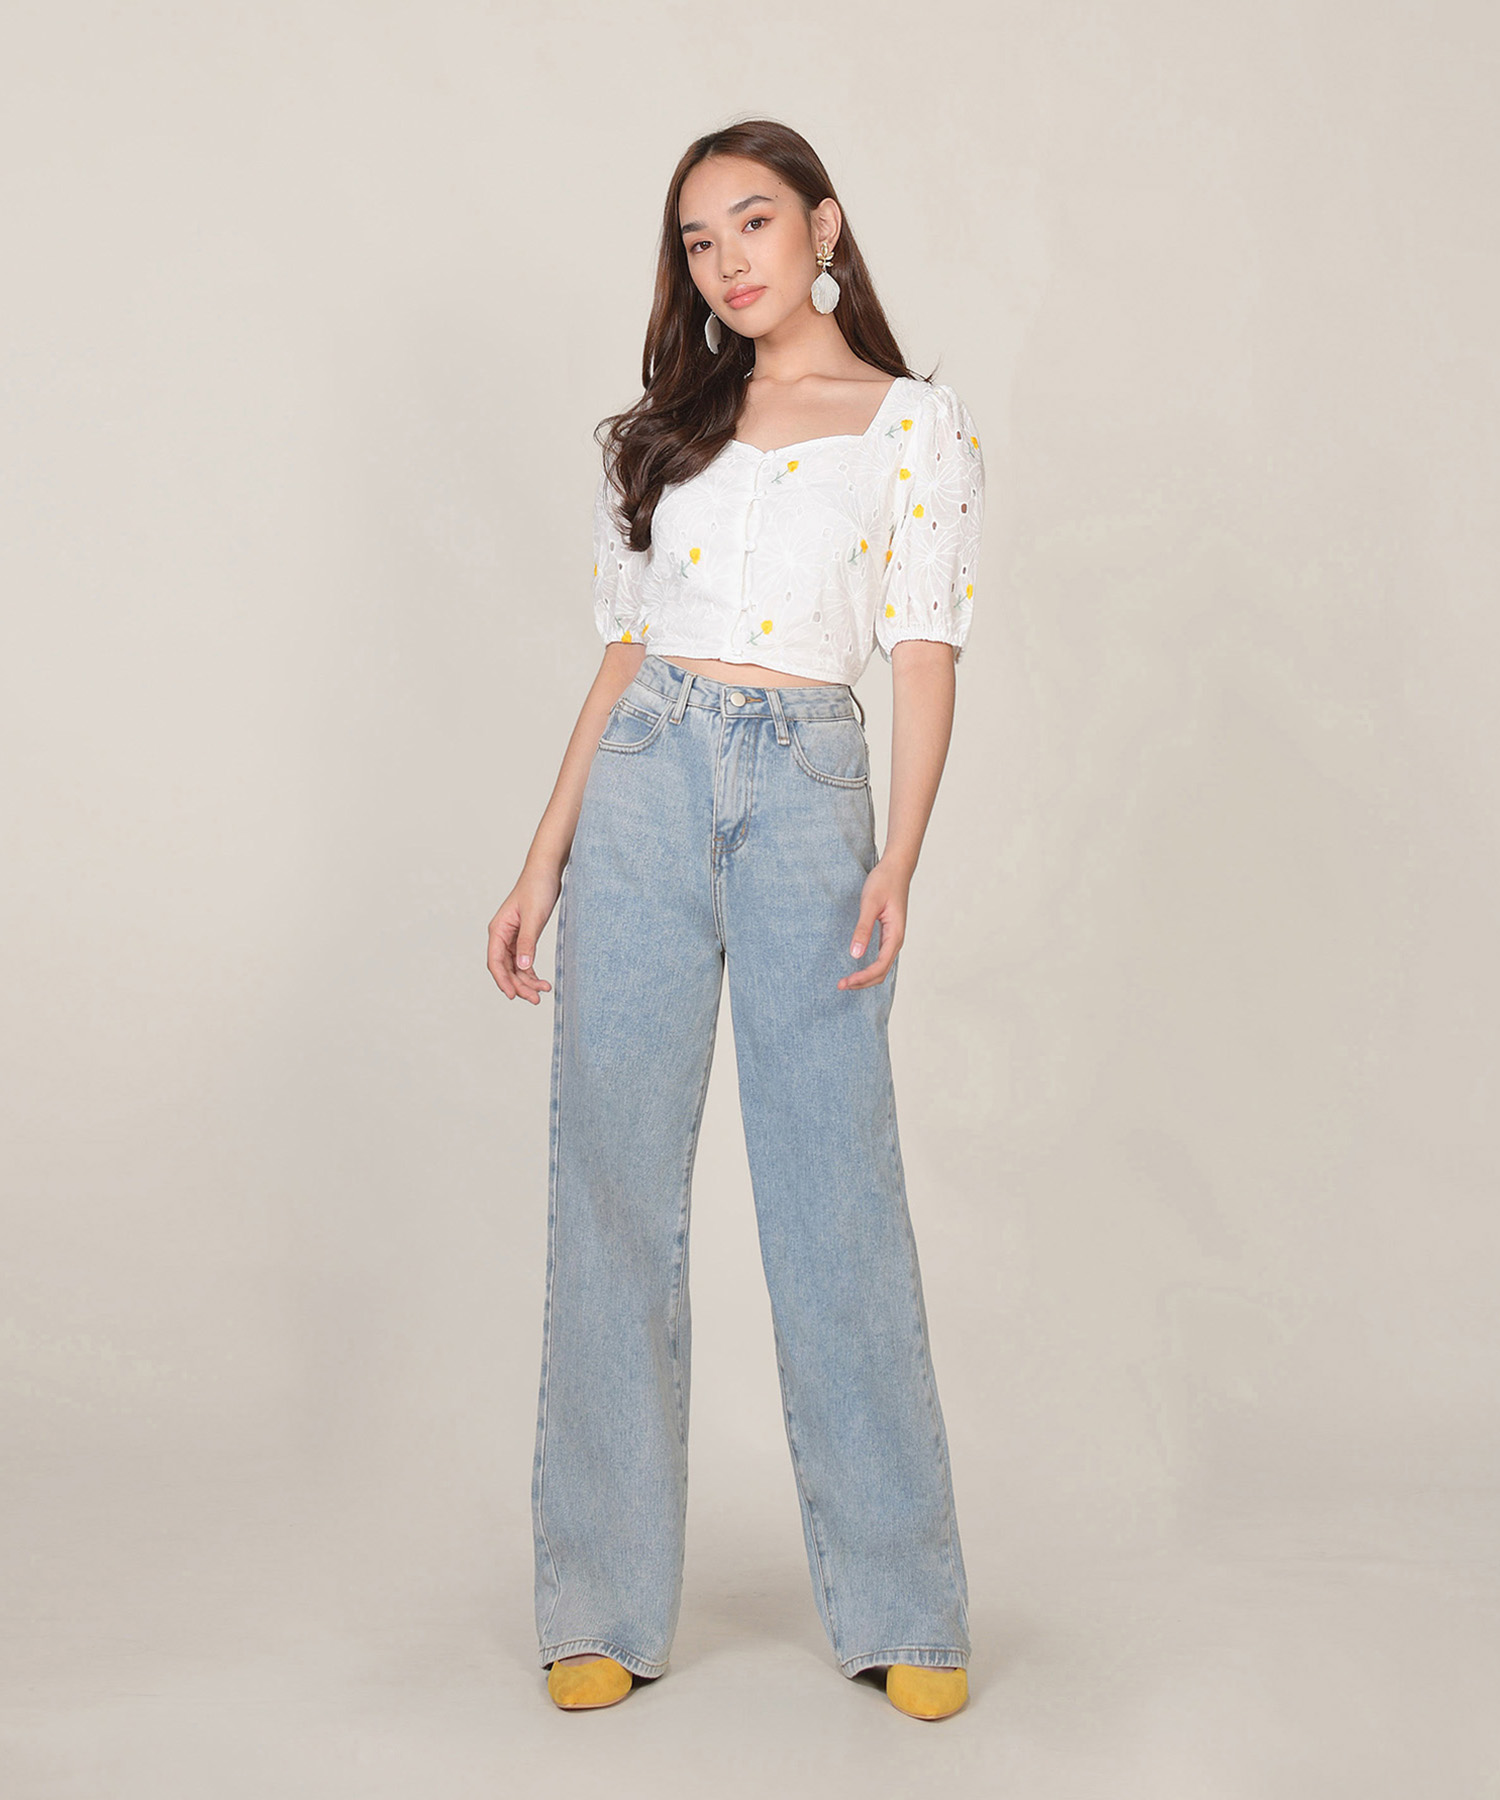 Ines Floral Embroidered Top - Daffodil